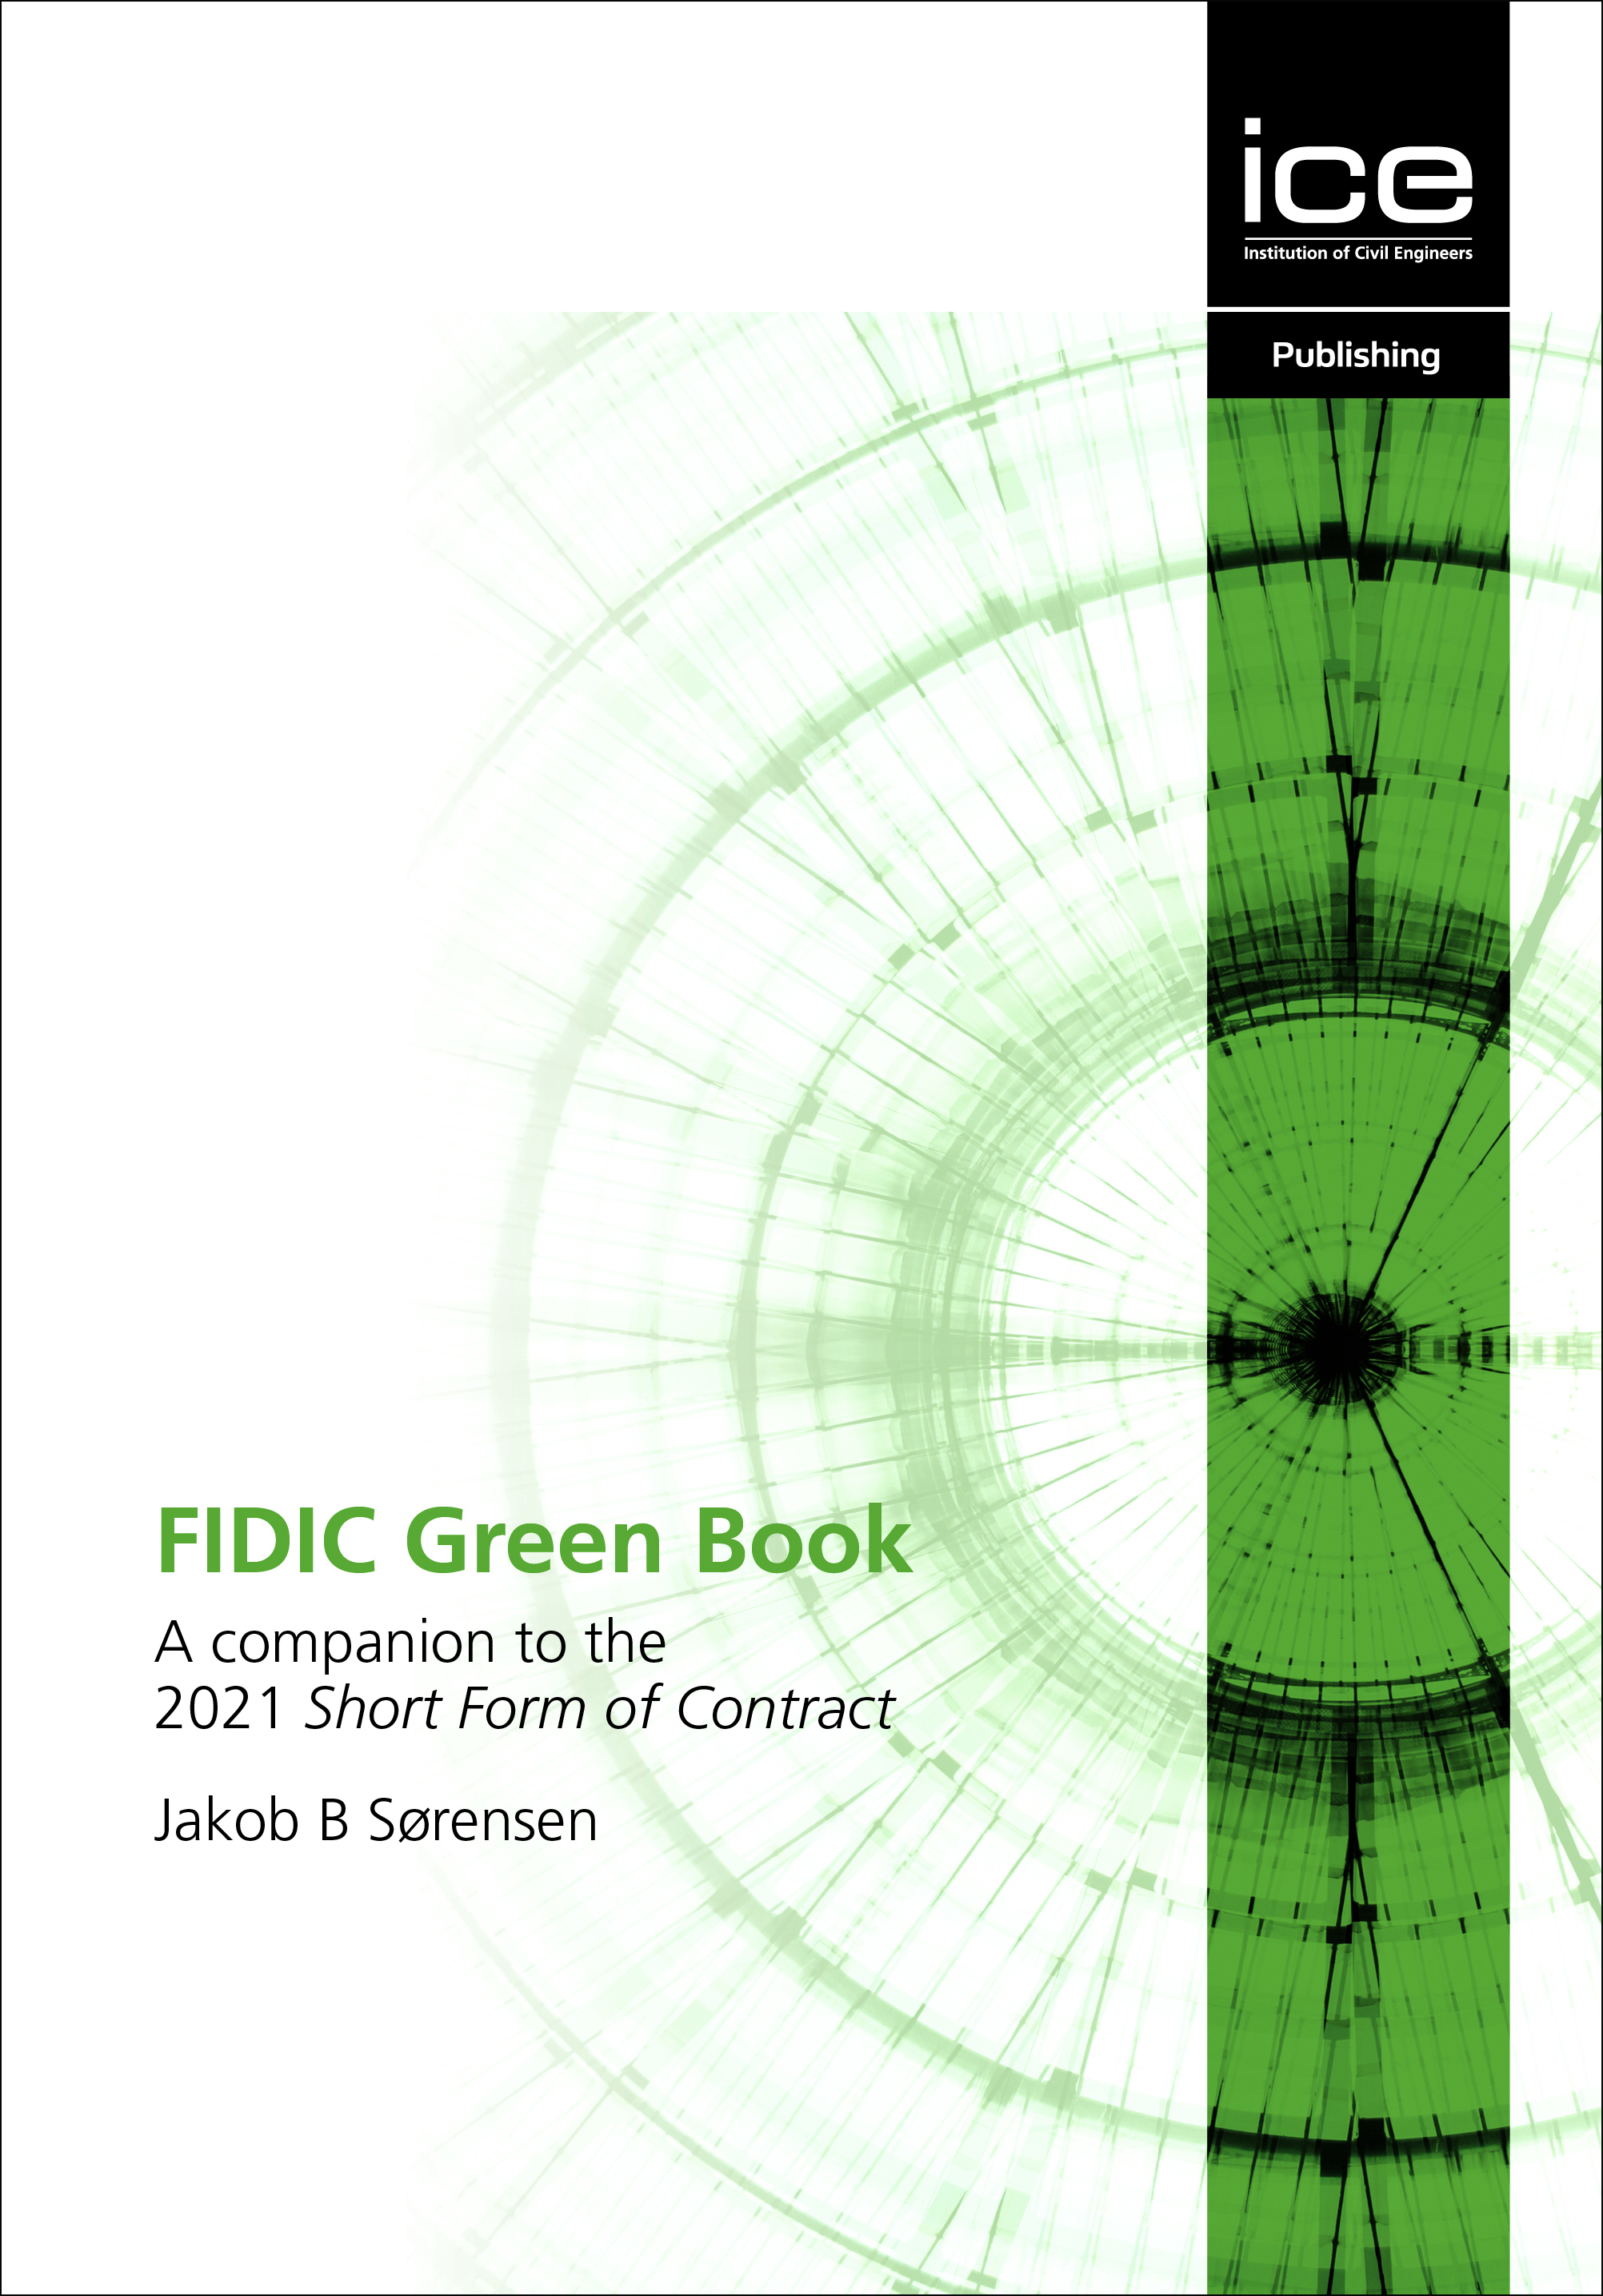 FIDIC Green Book: A companion to the 2021 Short Form of Contract